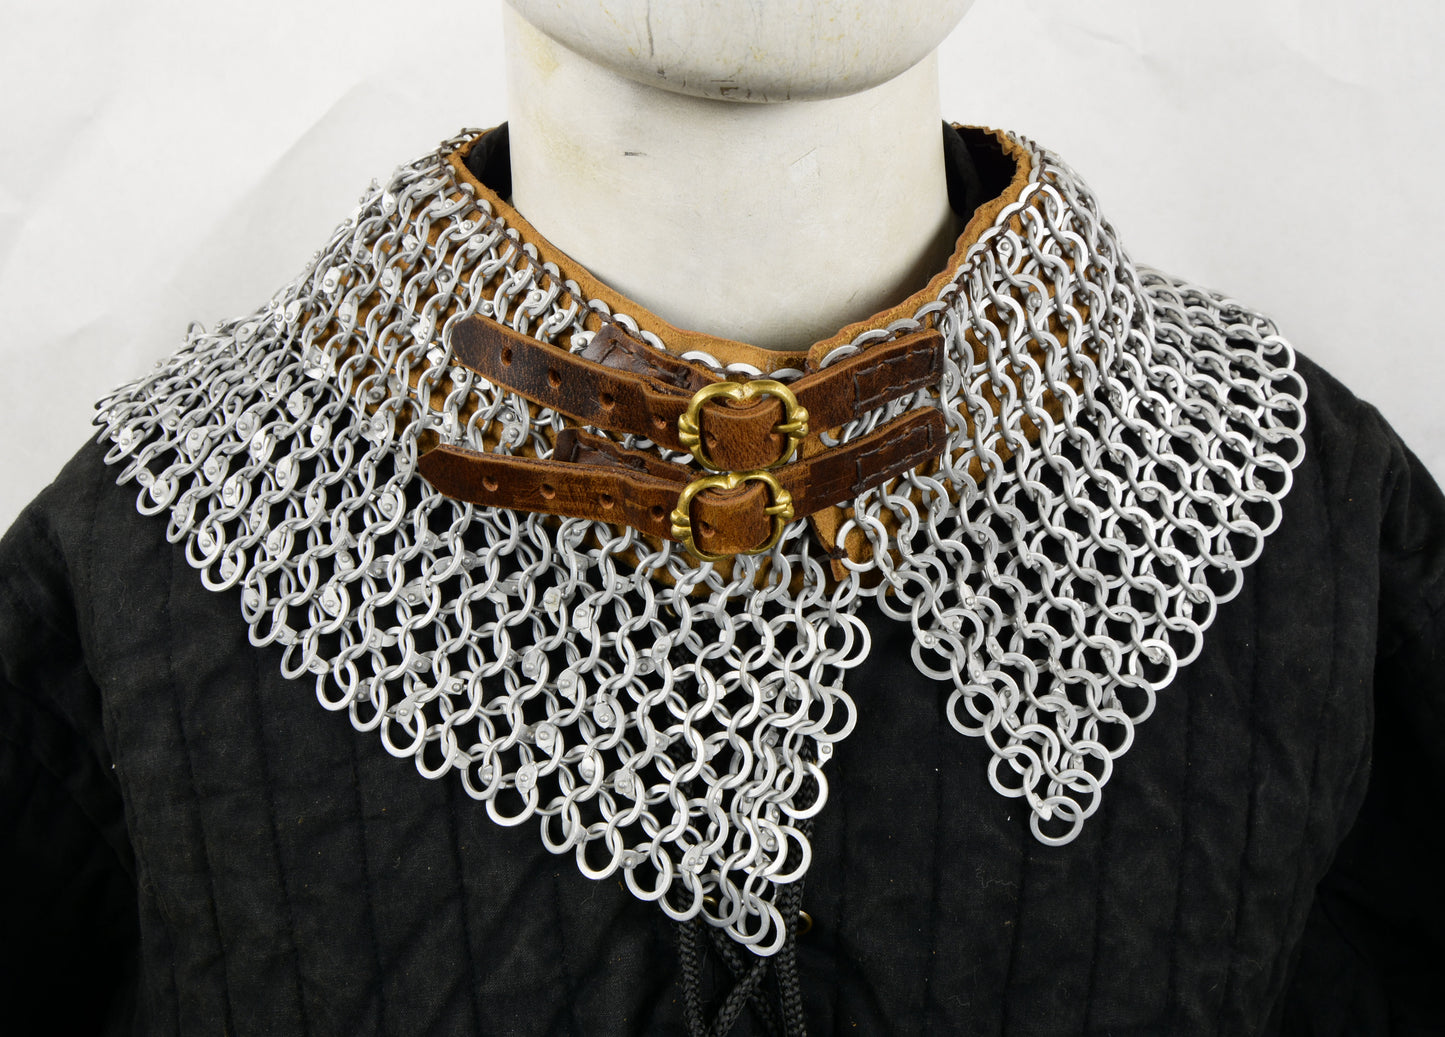 DANA Aluminum Chainmail Standard - Bishop's Mantle - Dome Riveted Round Rings and Alternating Flat Rings